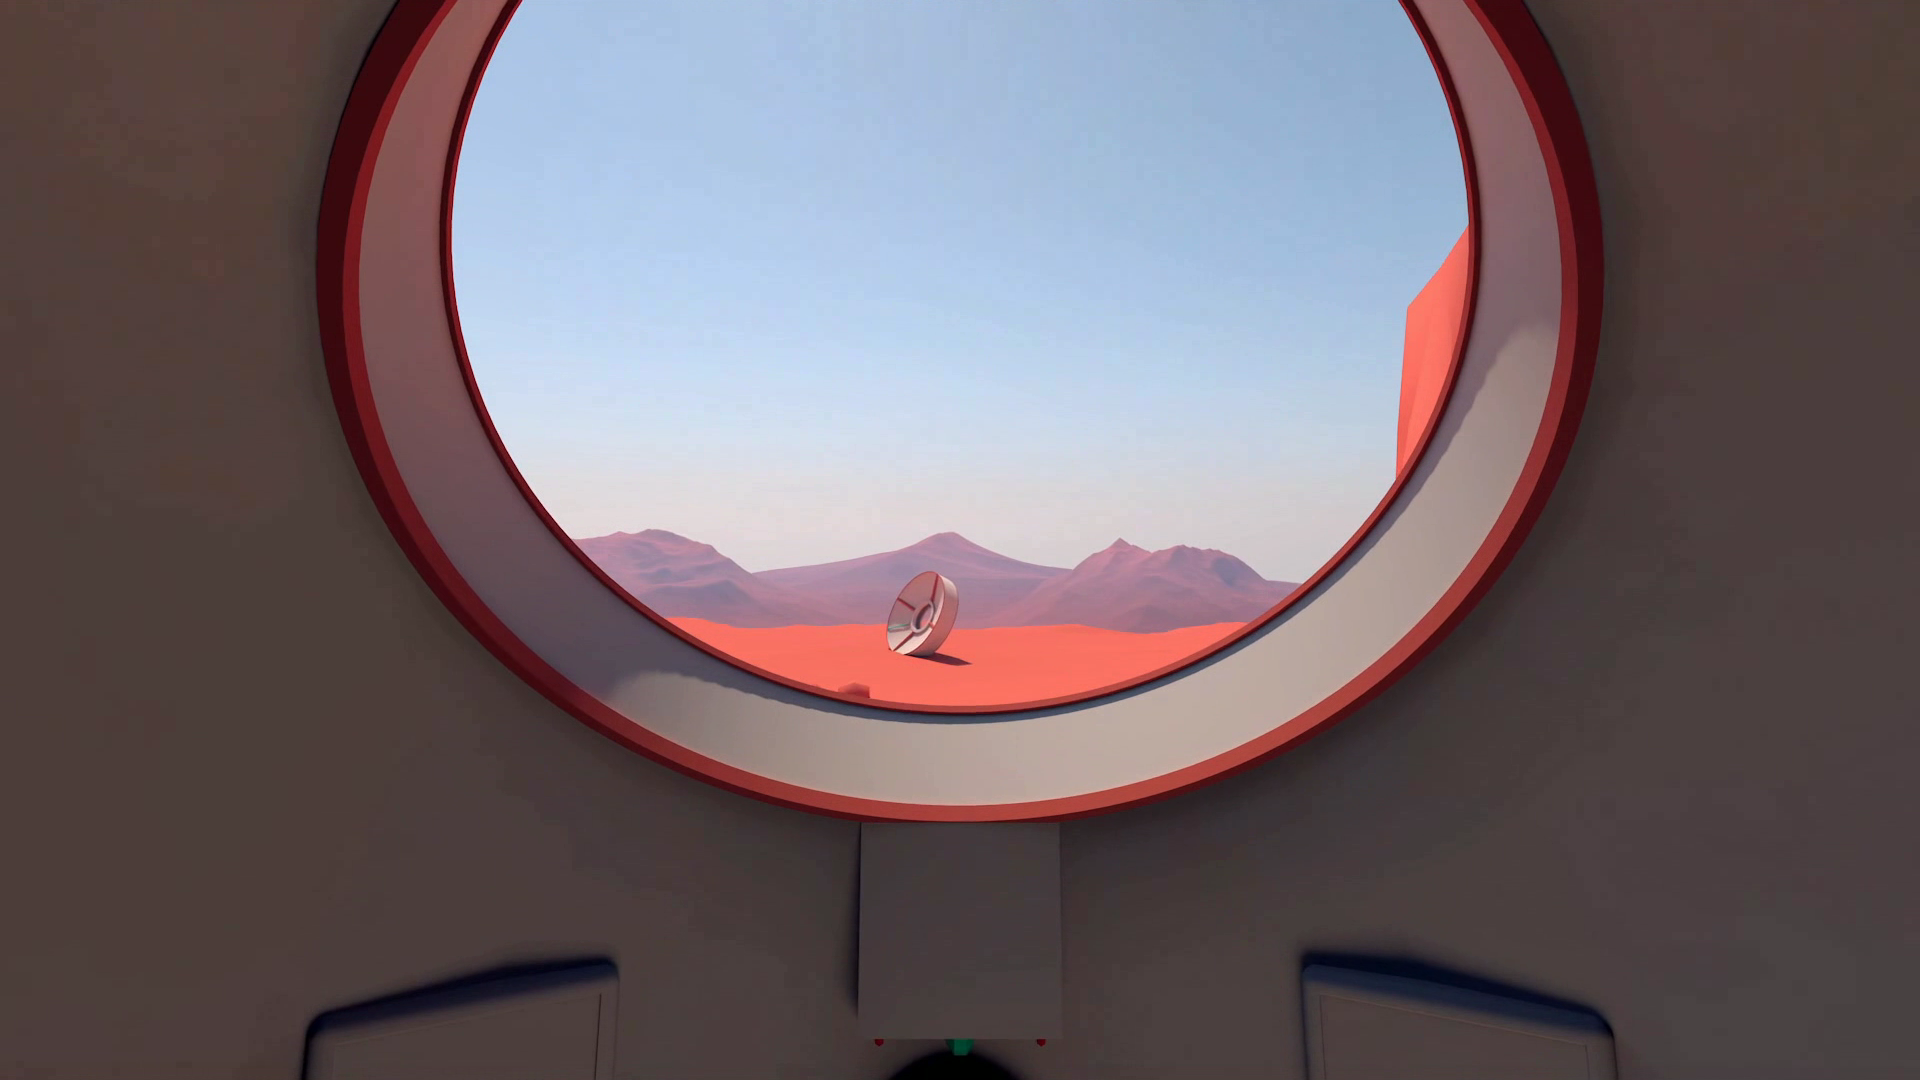 best online games – A view from a spaceship port window looking onto a red planet